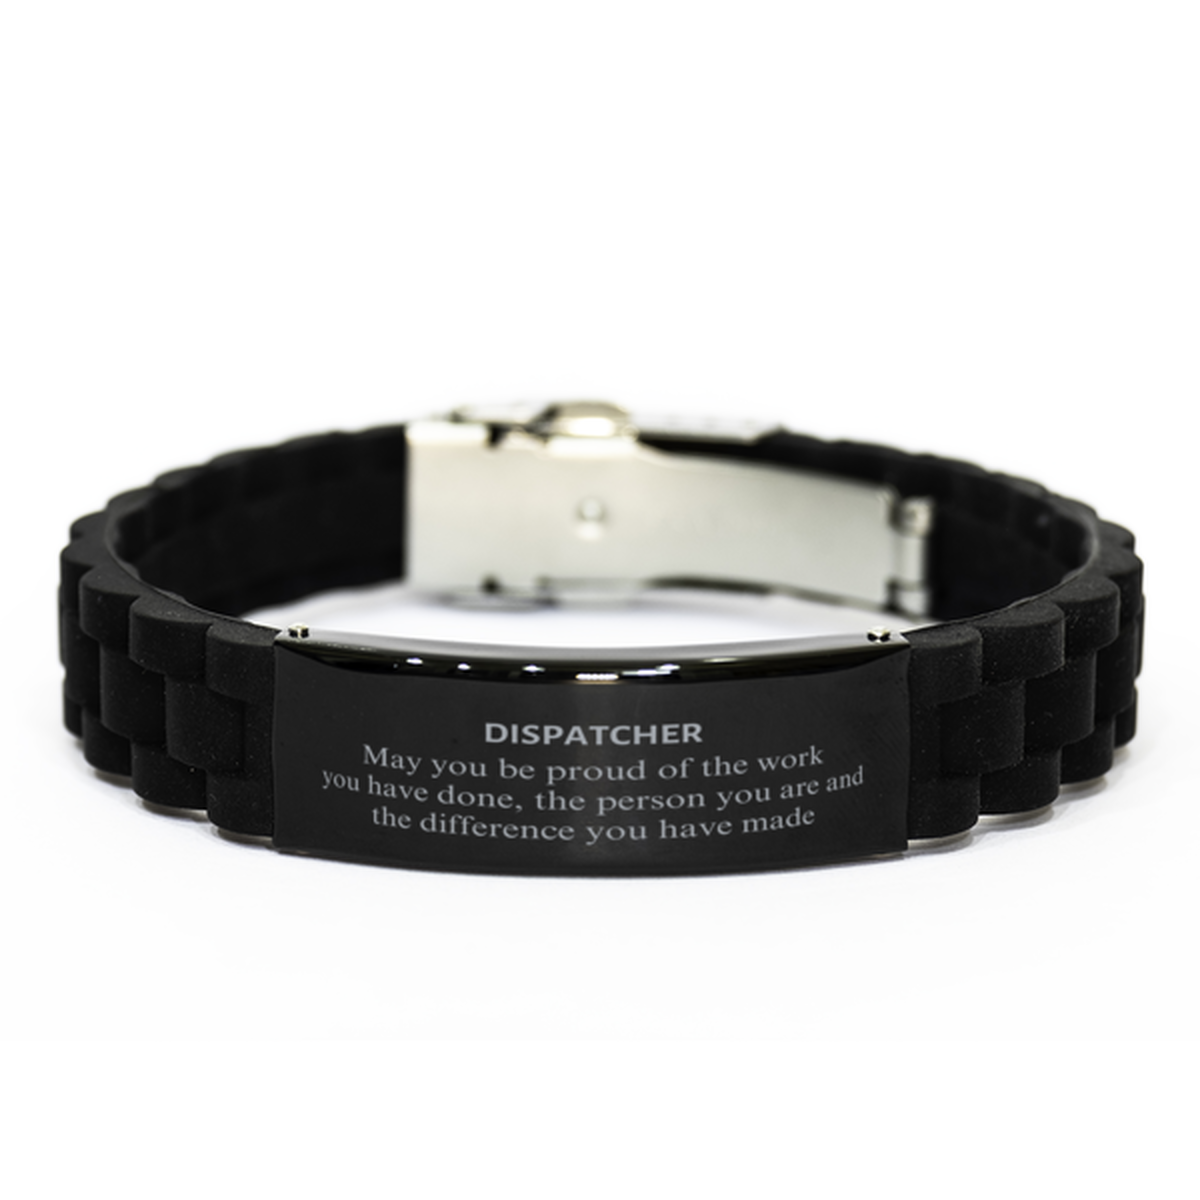 Dispatcher May you be proud of the work you have done, Retirement Dispatcher Black Glidelock Clasp Bracelet for Colleague Appreciation Gifts Amazing for Dispatcher